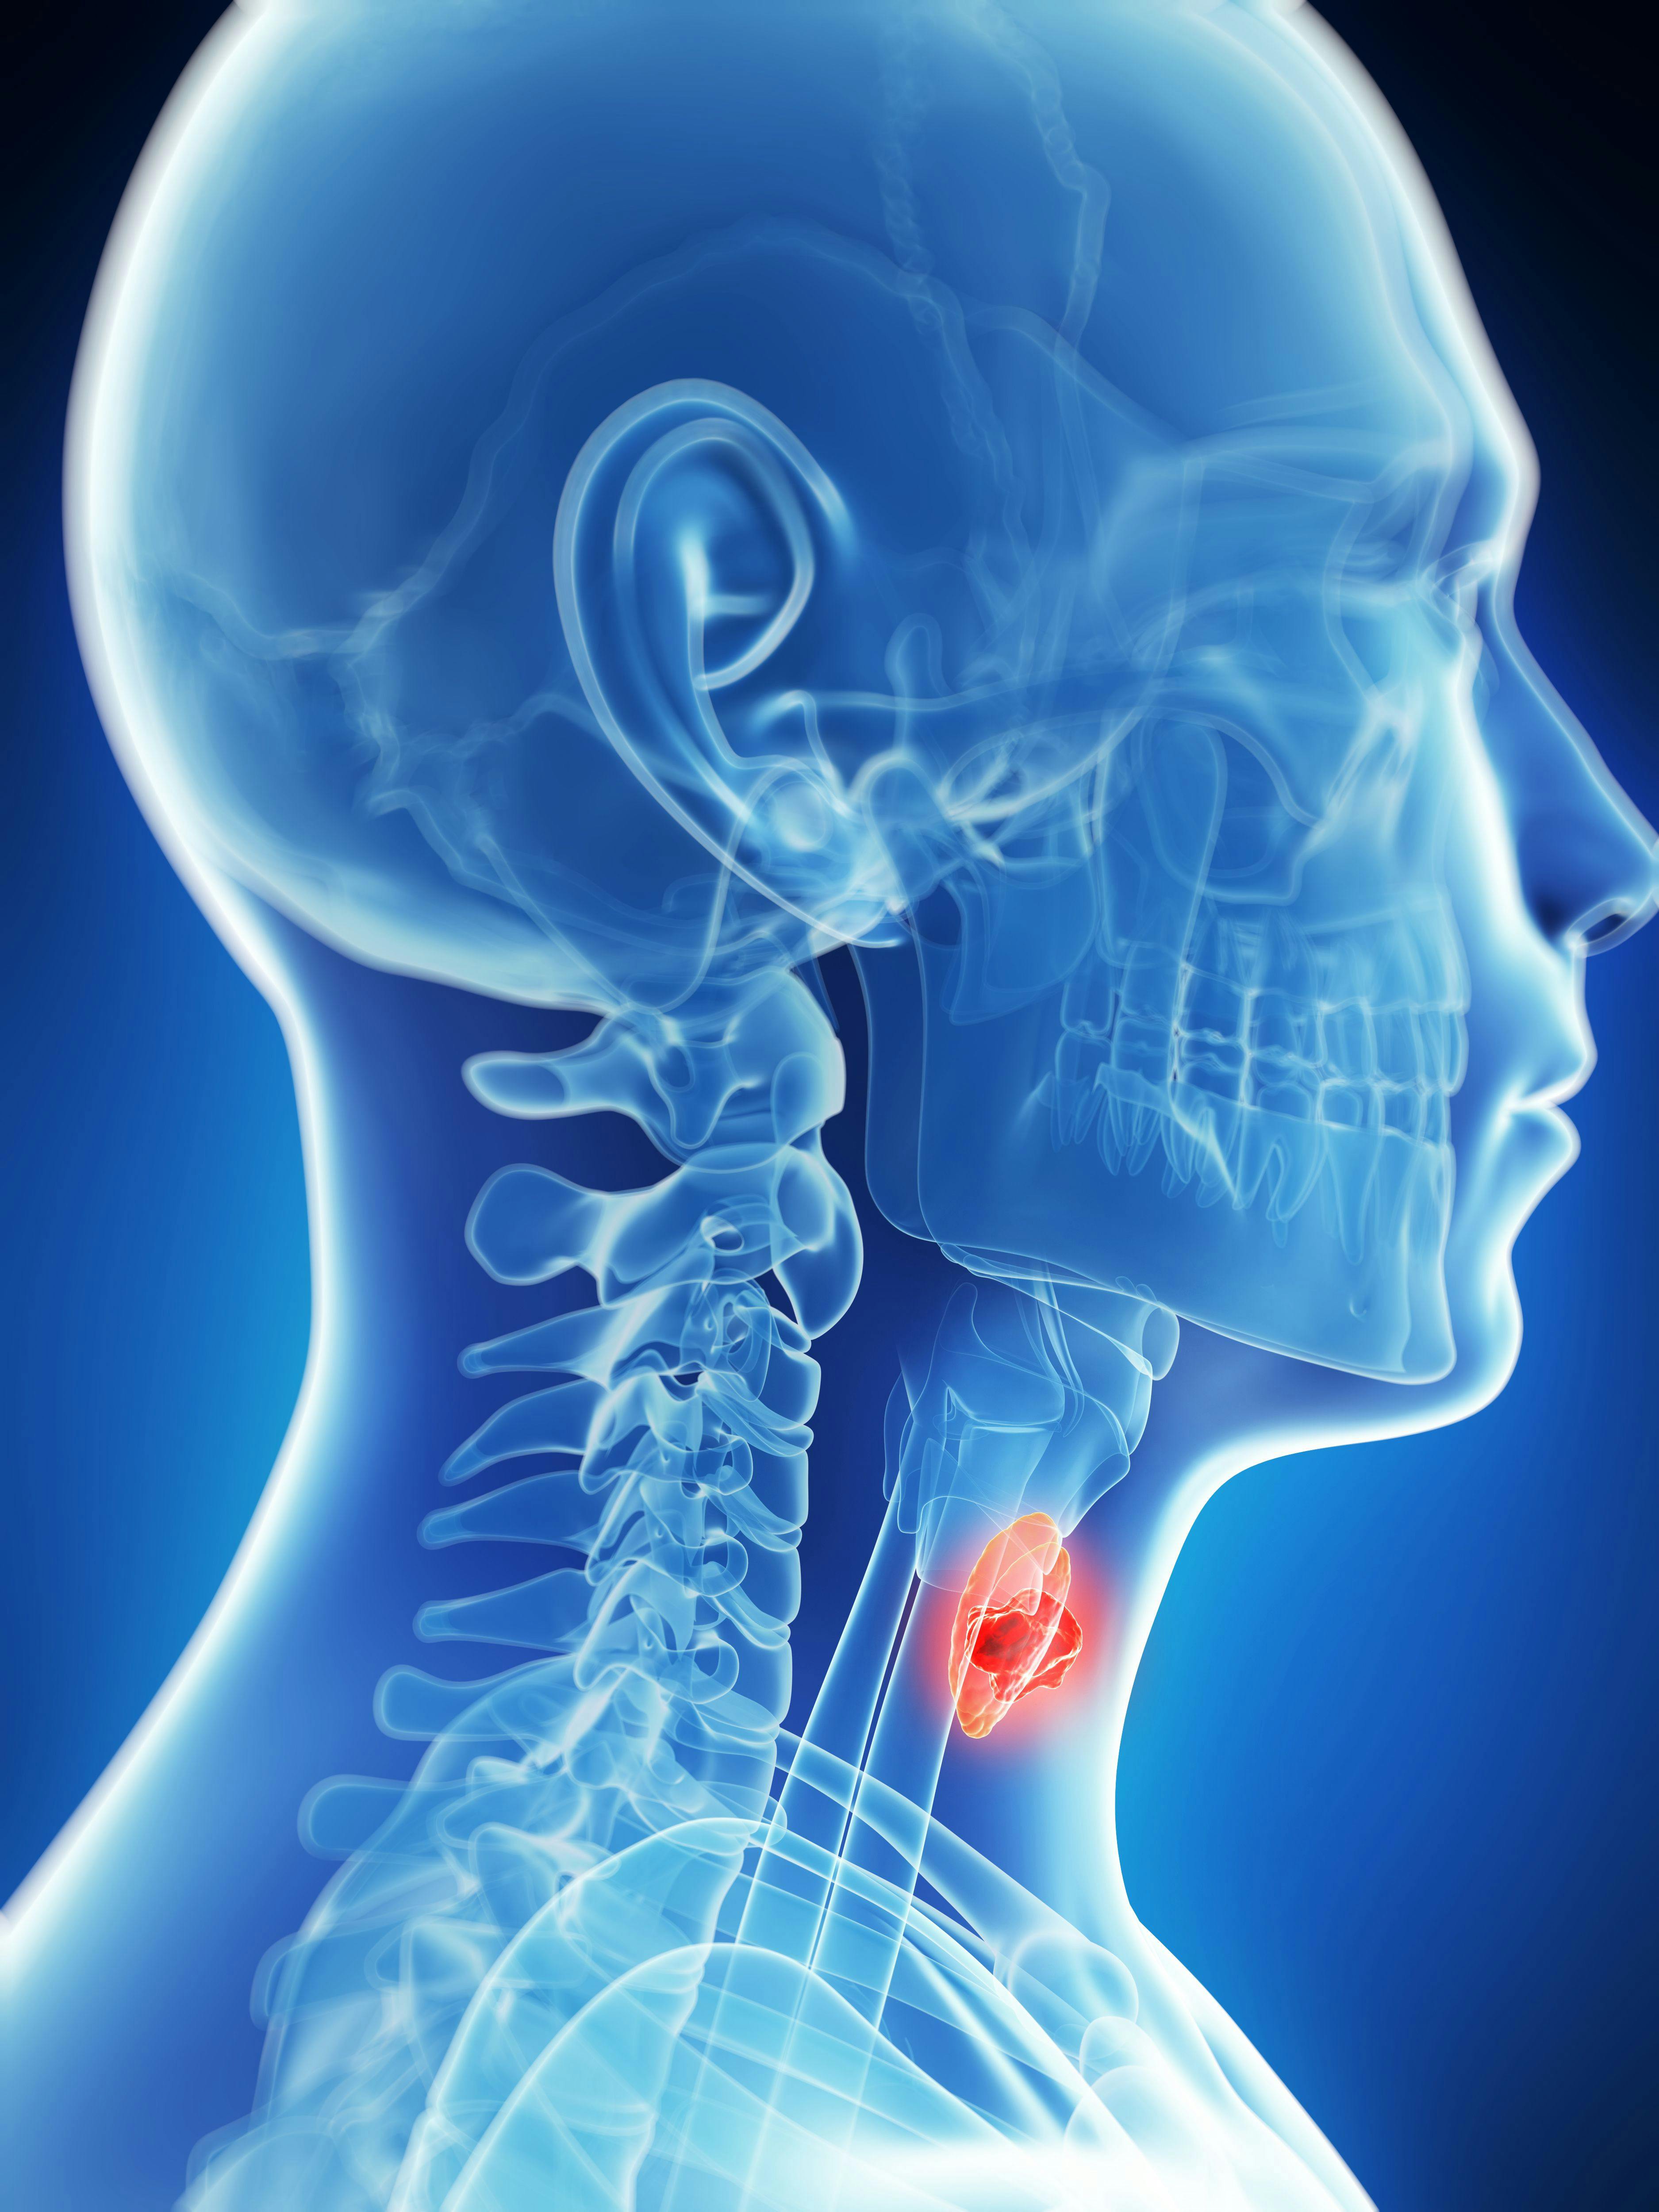 Investigators say that among those with platinum-refractory recurrent or metastatic head and neck squamous cell carcinoma who responded to nivolumab plus ipilimumab duration of response was not reached.